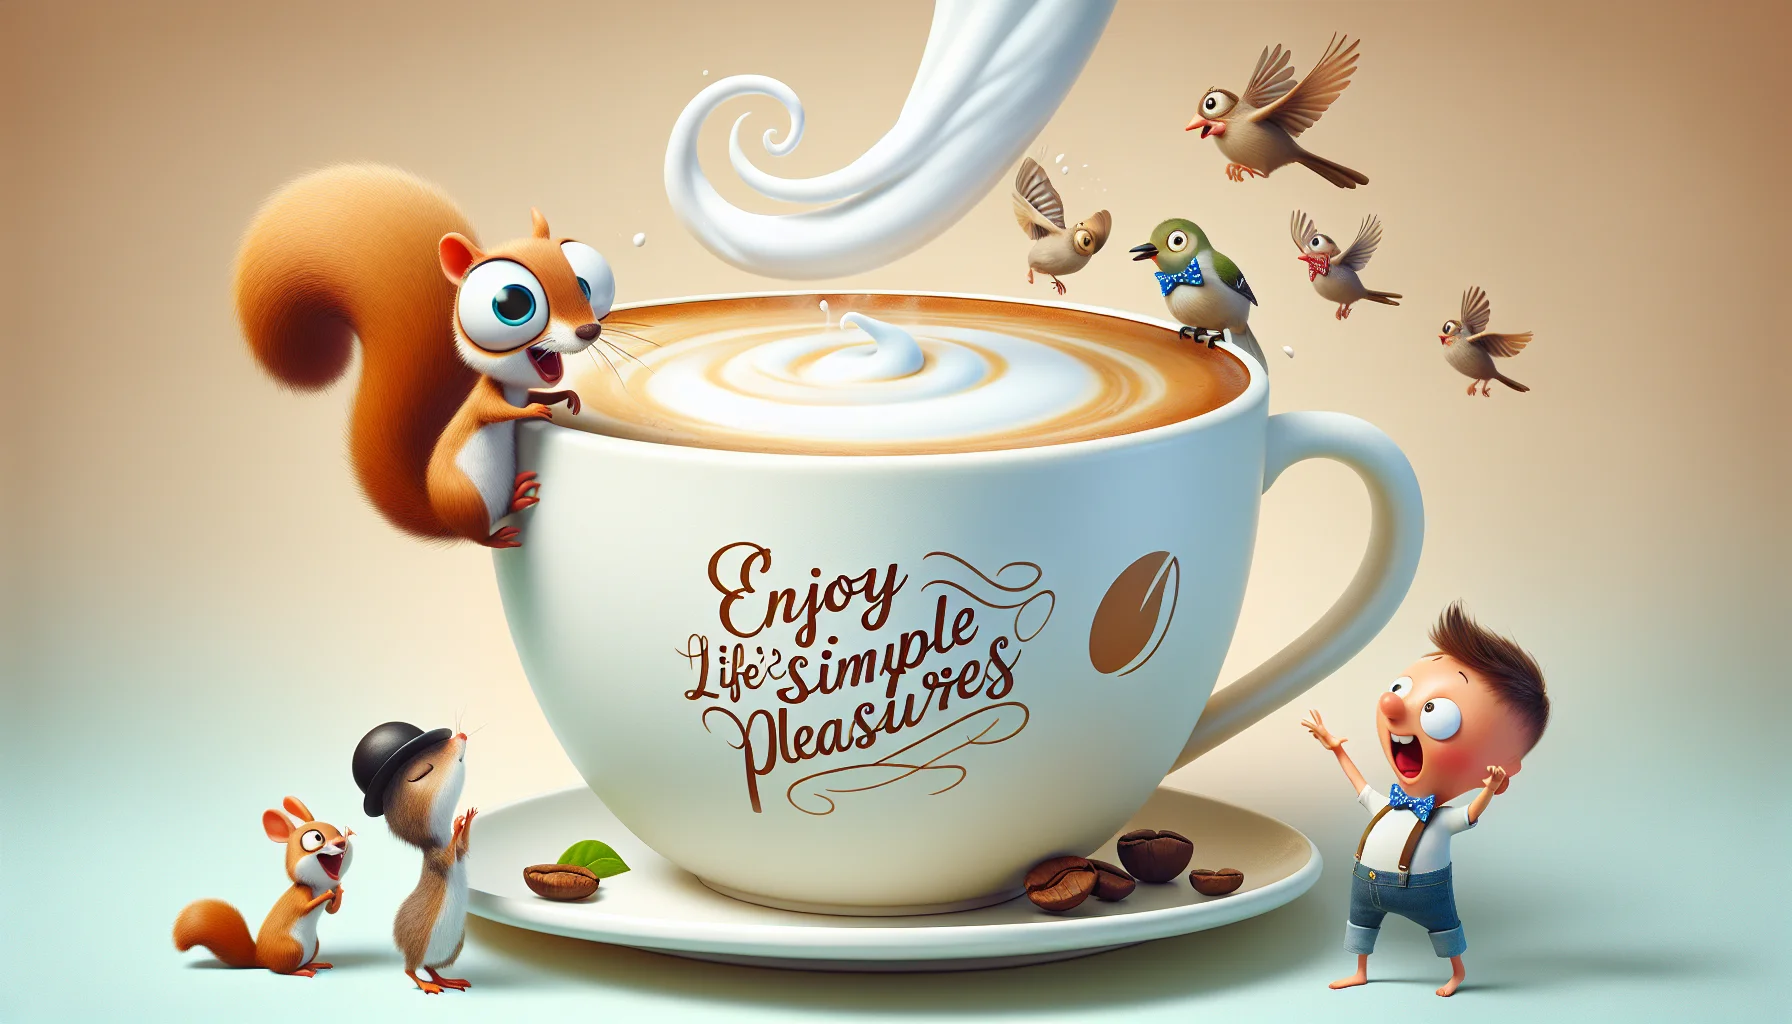 Create a humorous, inviting image featuring an oversized, frothy latte in a classic, round, white ceramic cup. The cup has 'Enjoy Life's Simple Pleasures' written beautifully in cursive along the side, meanwhile, a comical scenario is taking place around it. A cartoonish squirrel with a wide-eyed expression, wearing suspenders and a bowler hat, is trying to climb the cup for a sip of the latte. A couple of tiny birds sporting bow ties are flapping excitedly around the spiraling steam, giving a dove peace sign with their wings, signifying the universal love for coffee.